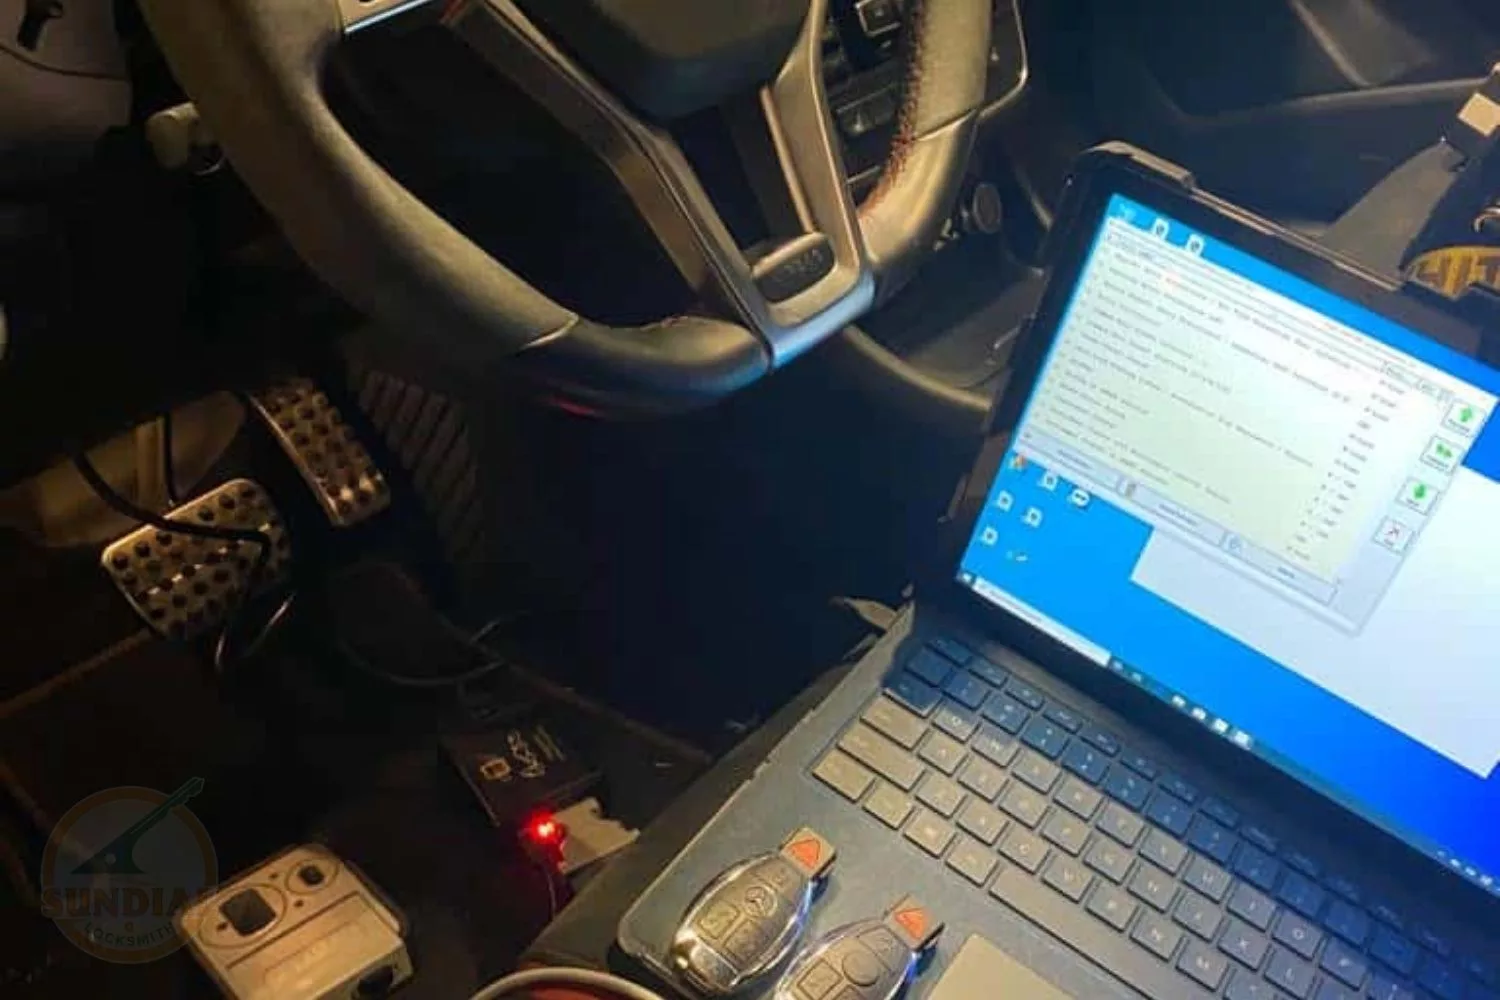 Car diagnostics with laptop and tools inside vehicle.